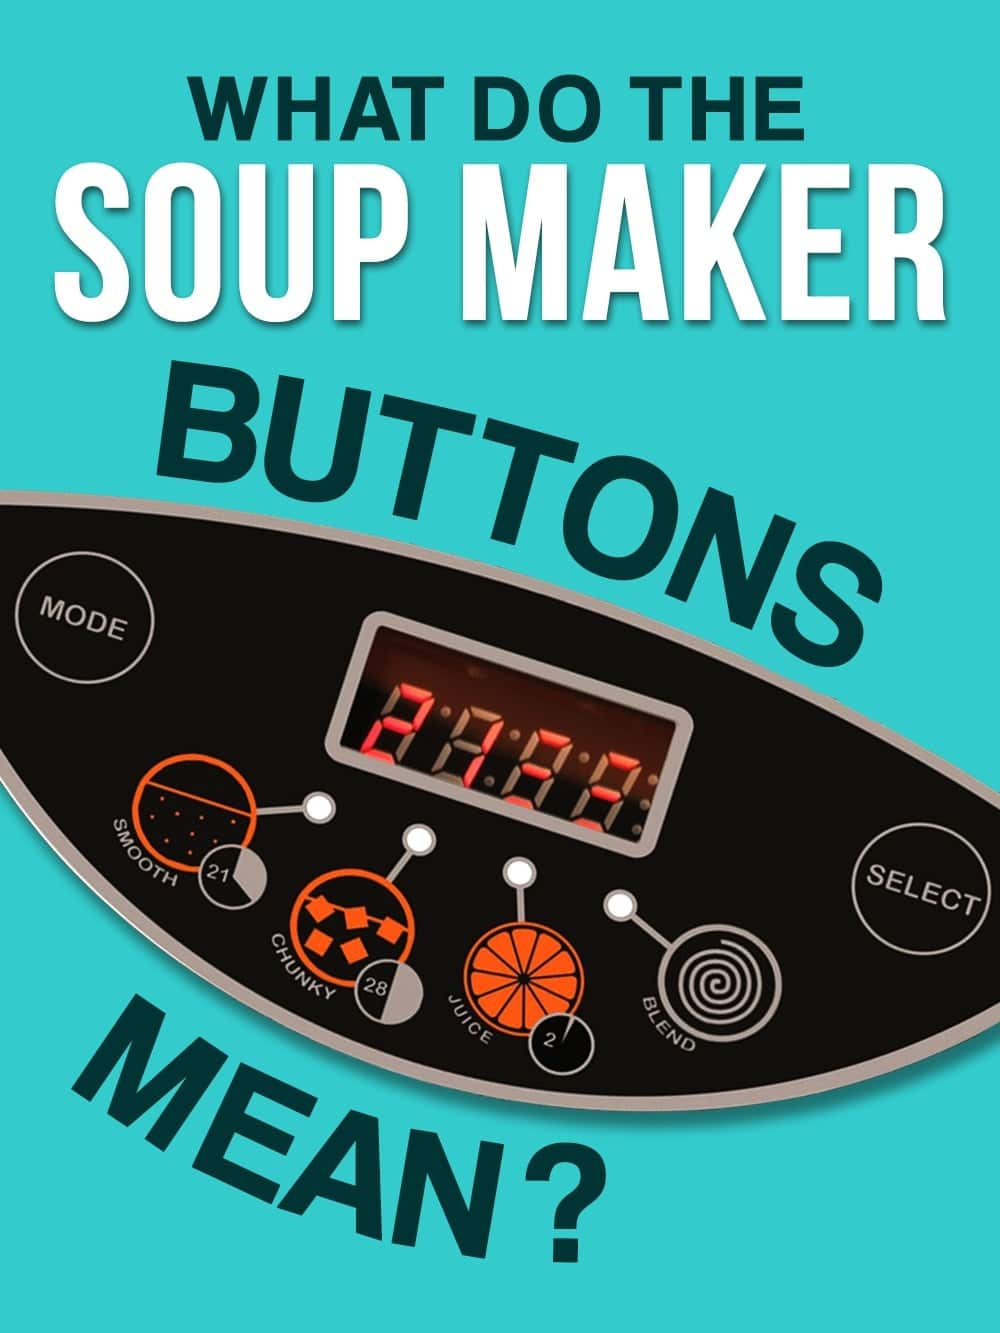 Soup Maker Recipes | Discover what the buttons mean on your Morphy Richards Soup Maker from RecipeThis.com